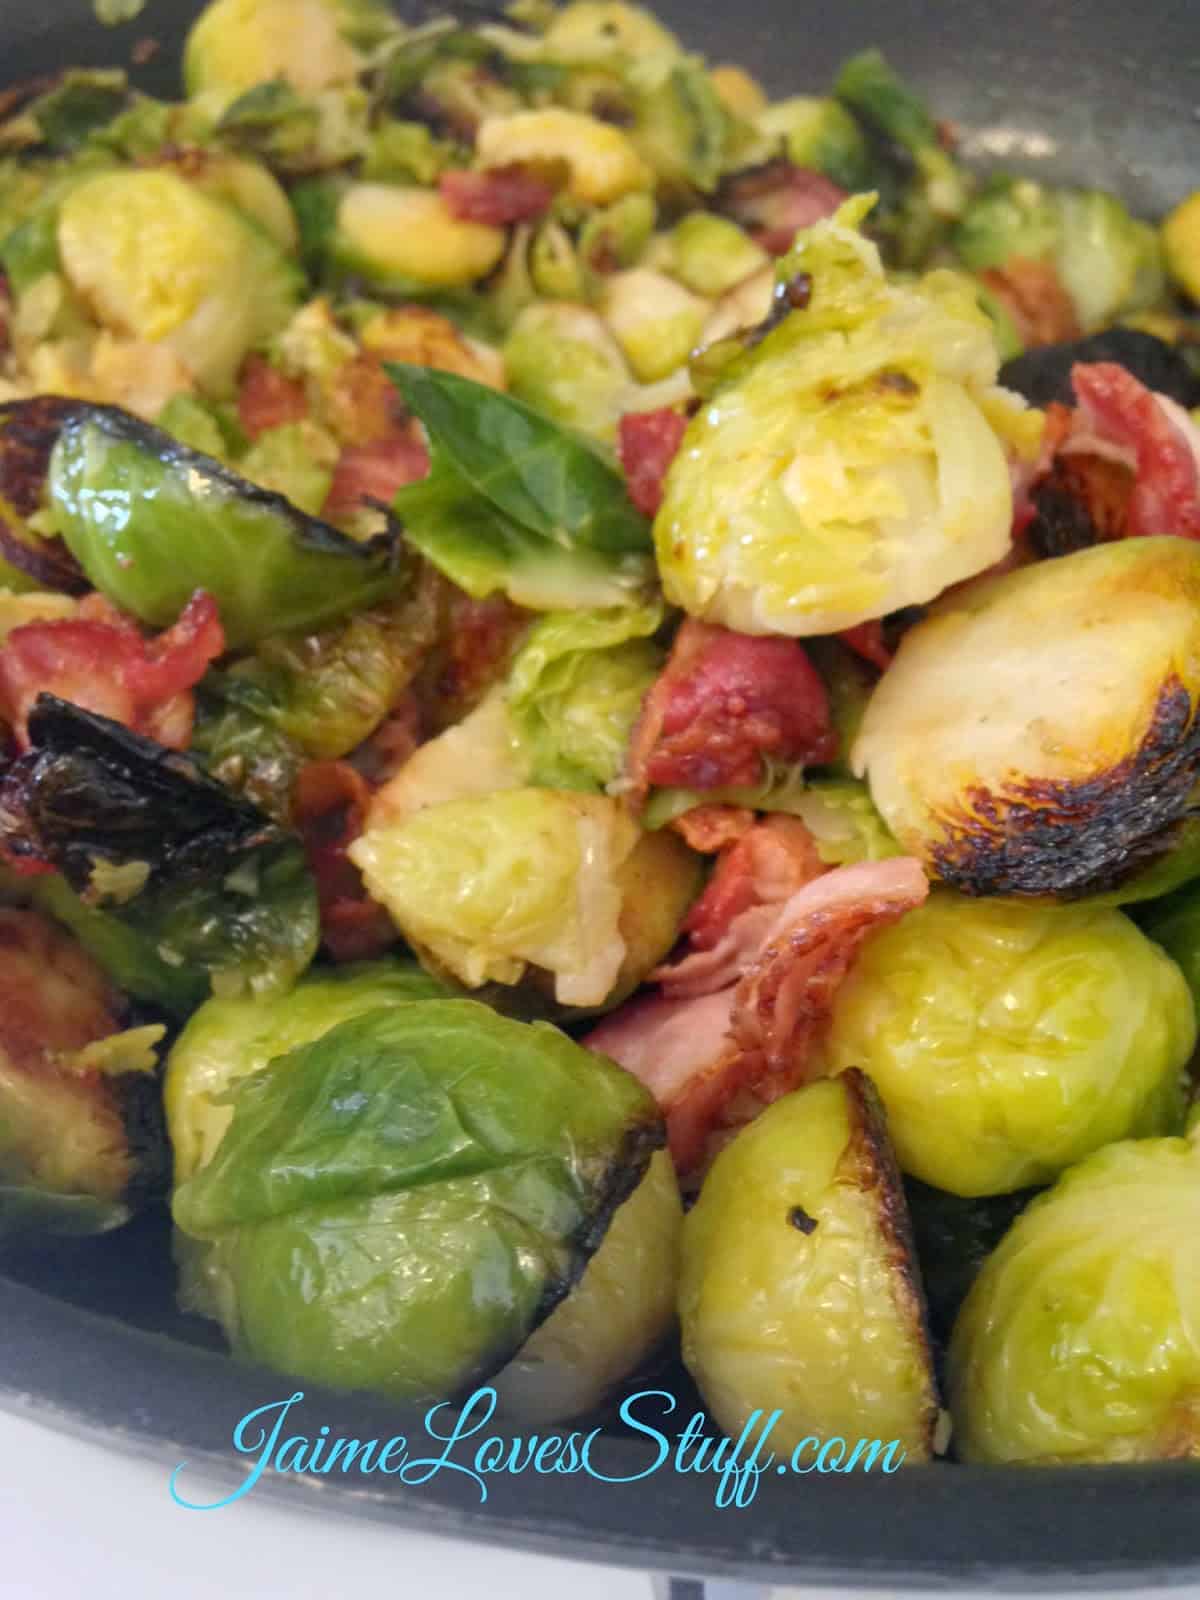 Bacon and brussel sprouts